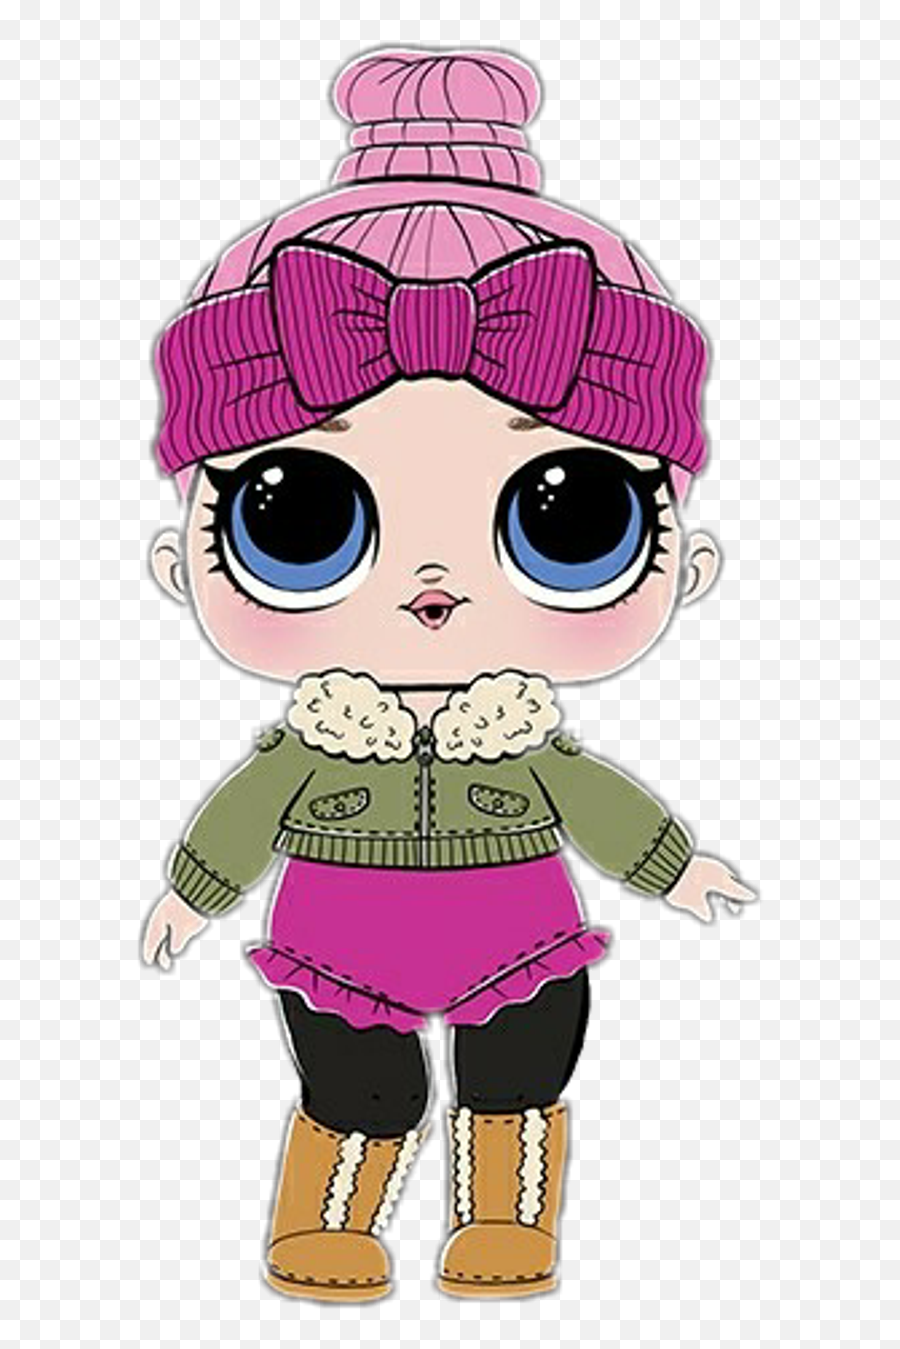 Cozy Babe Lol Doll Png Image - Lol Surprise Cozy Baby,Lol Surprise Dolls Png